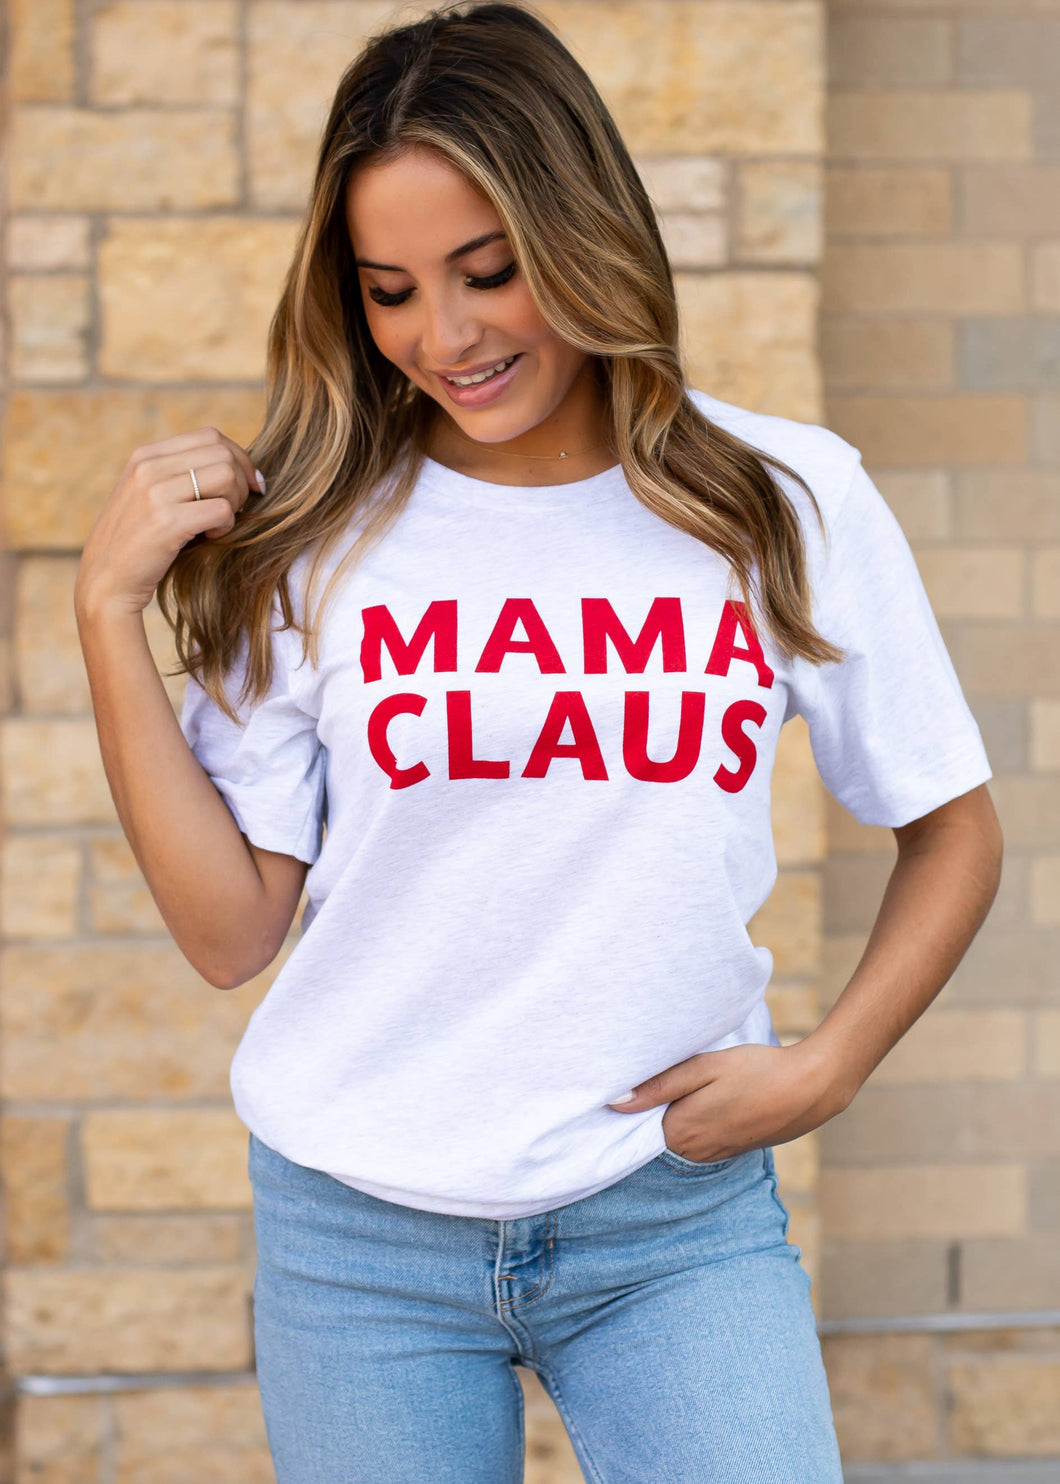 MAMA CLAUS written in red ink on light grey tee